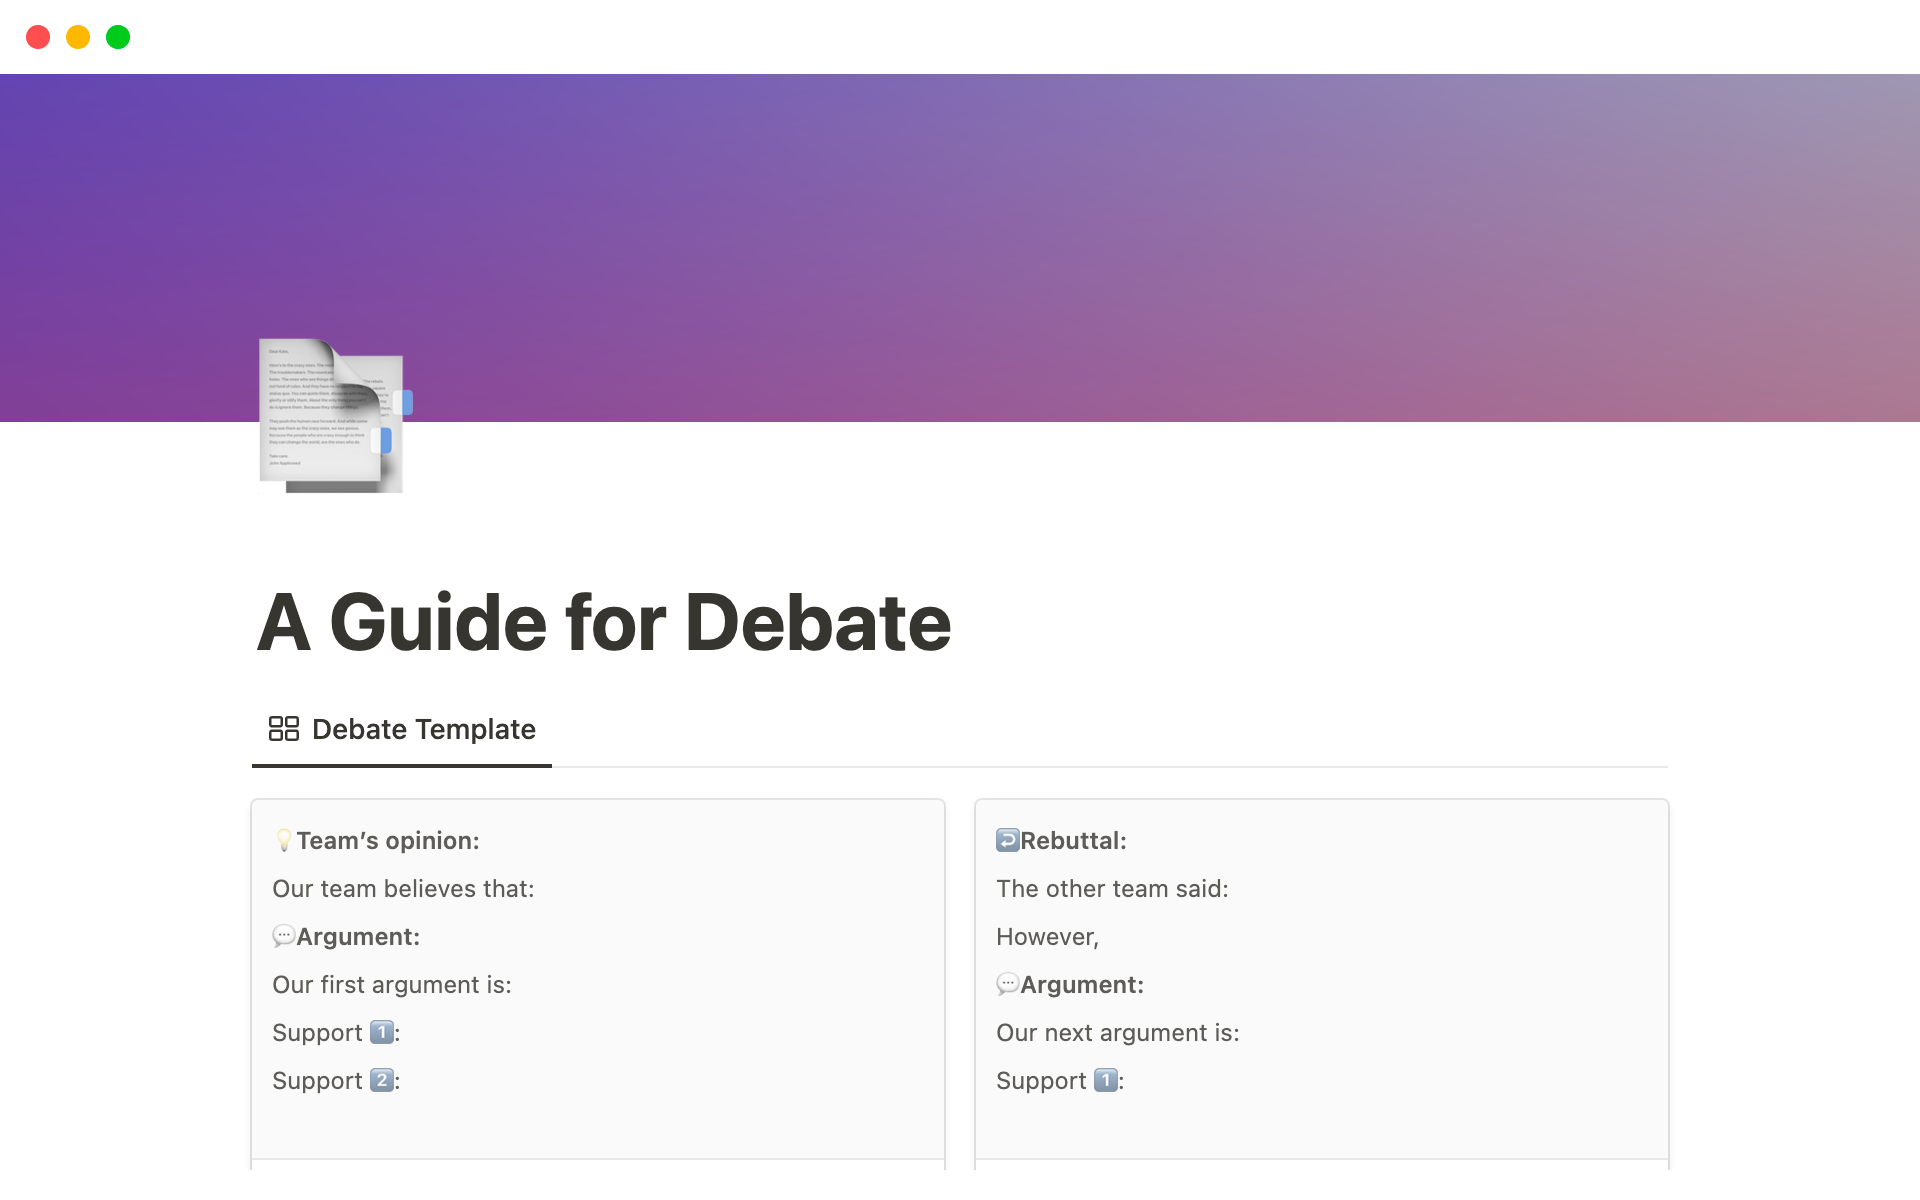 A debate template can help organize thoughts and arguments for a debate by providing a structure to follow.